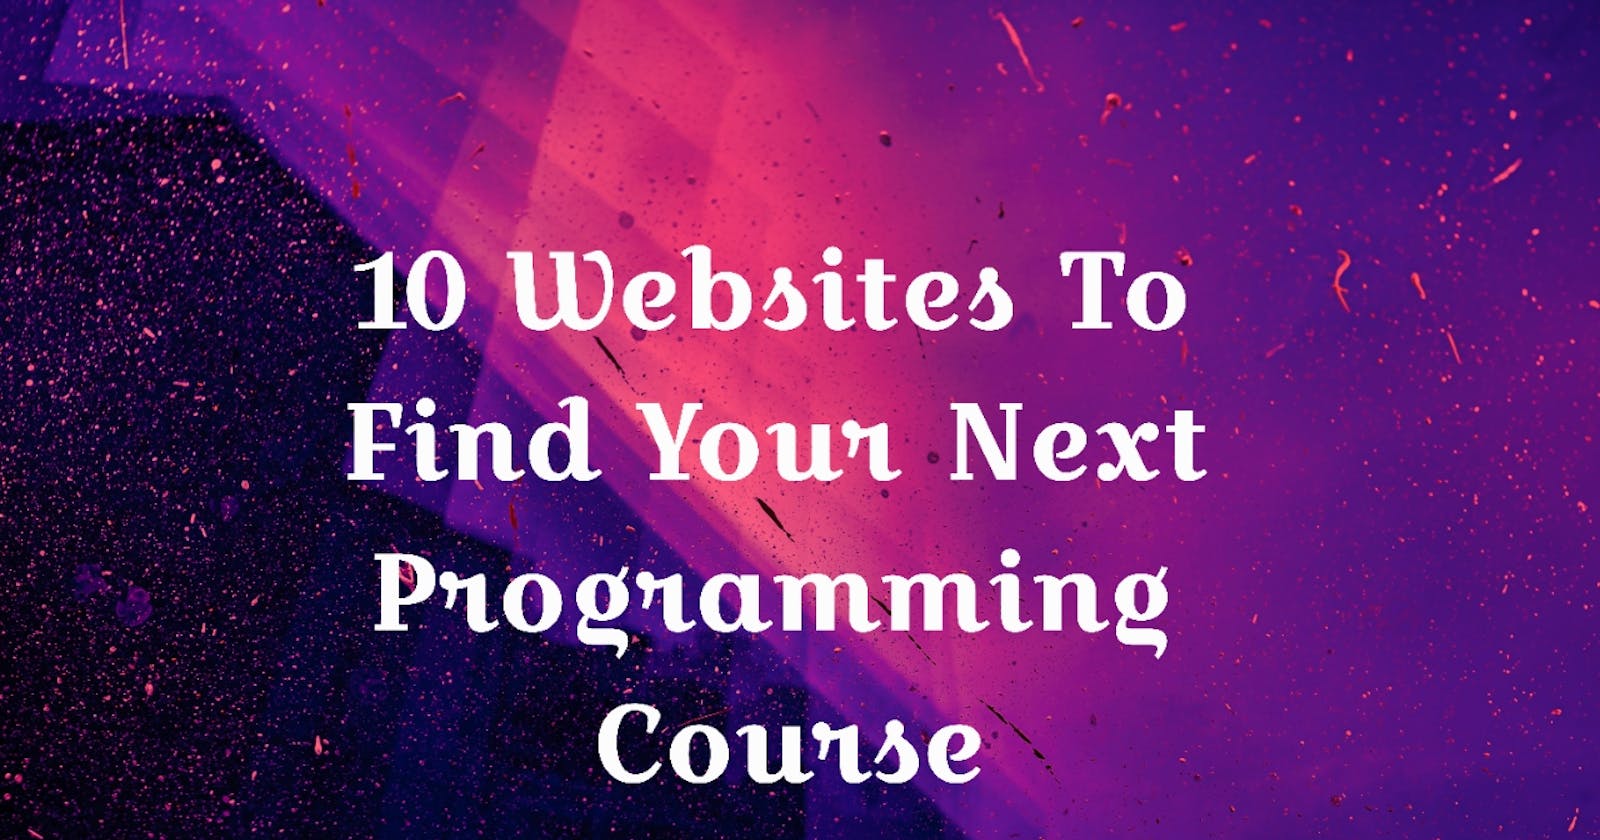 10 Websites To Find Your Next Programming Course